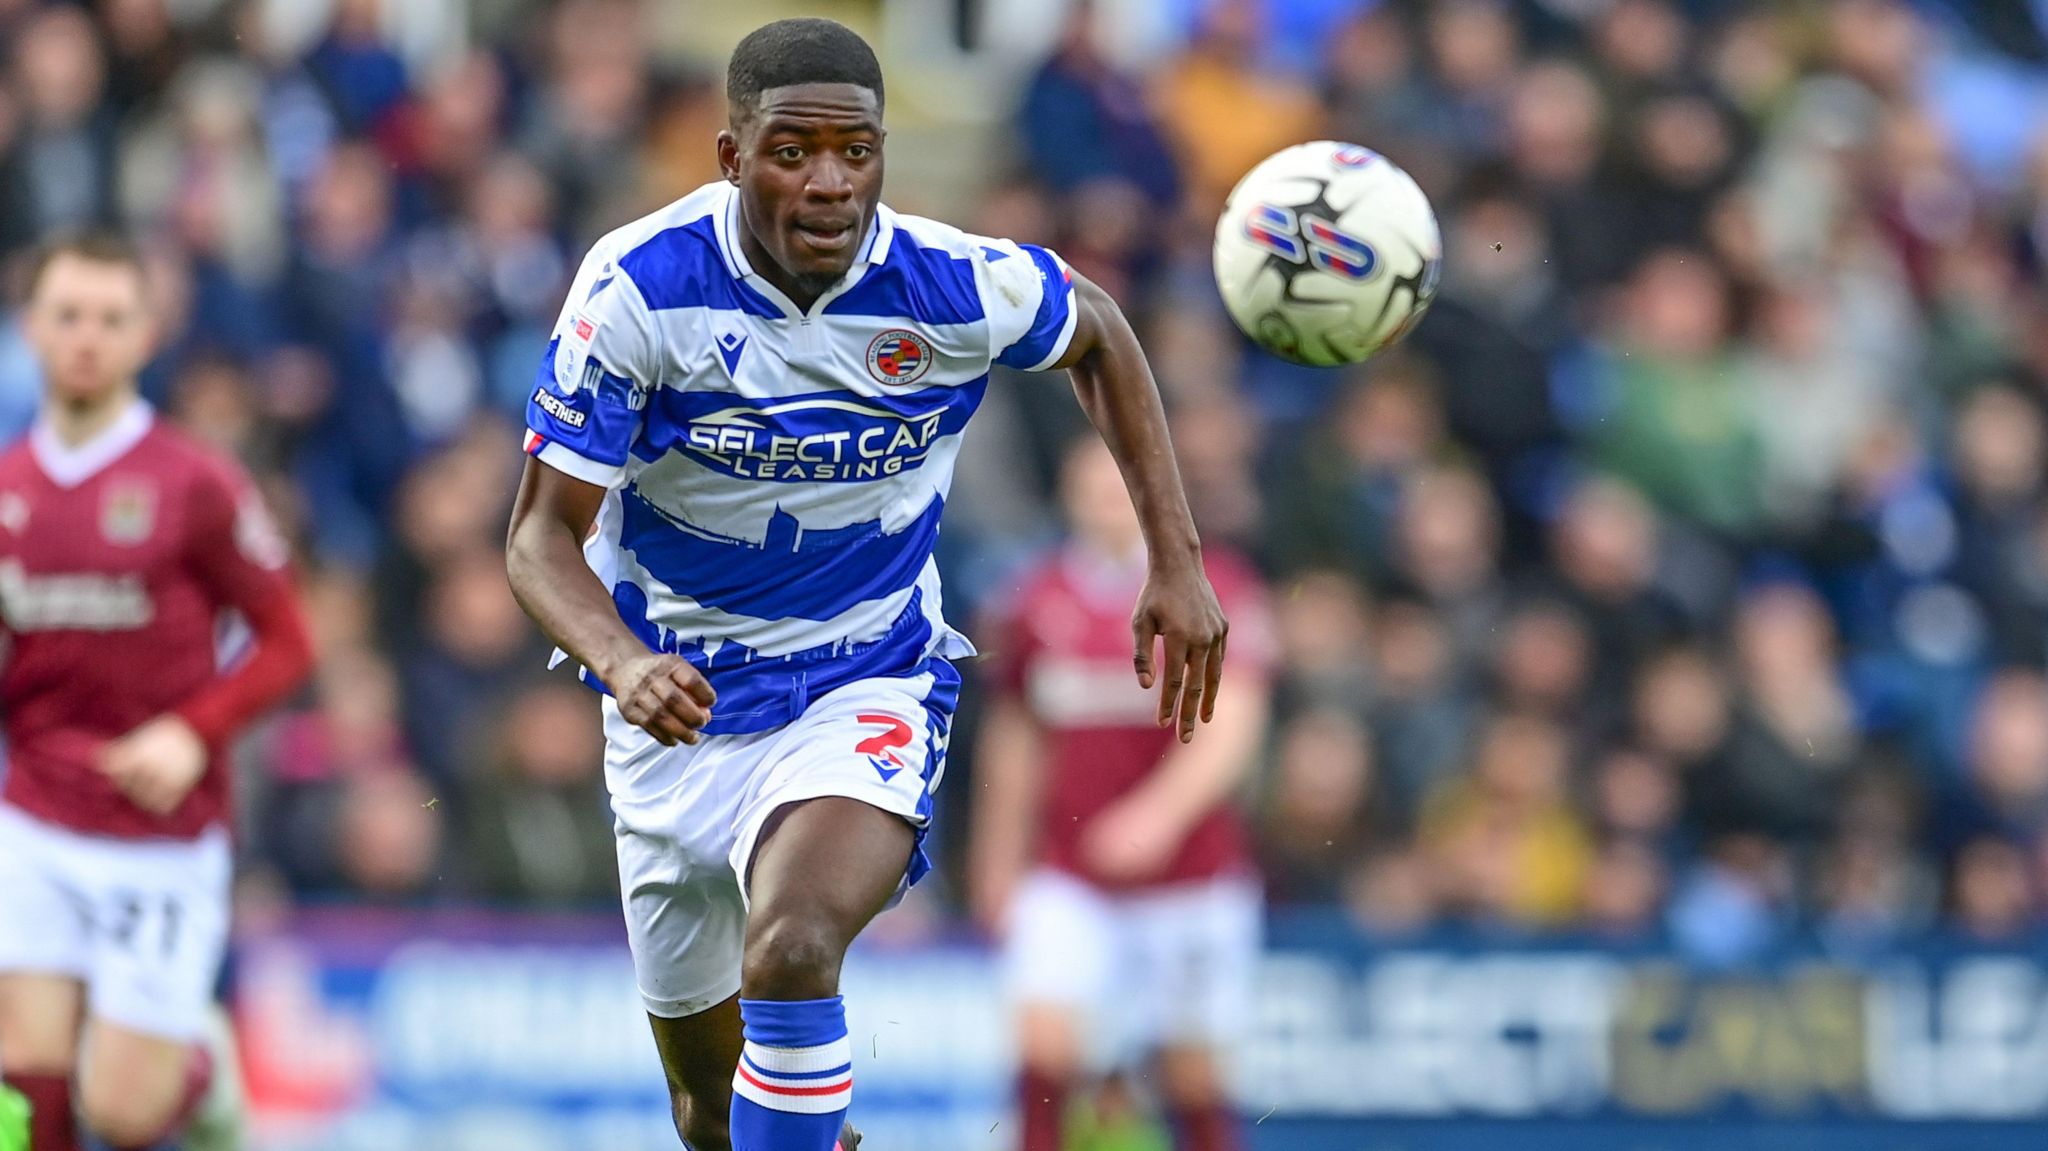 Clinton Mola and Sam Hutchinson among four released by Reading - BBC Sport